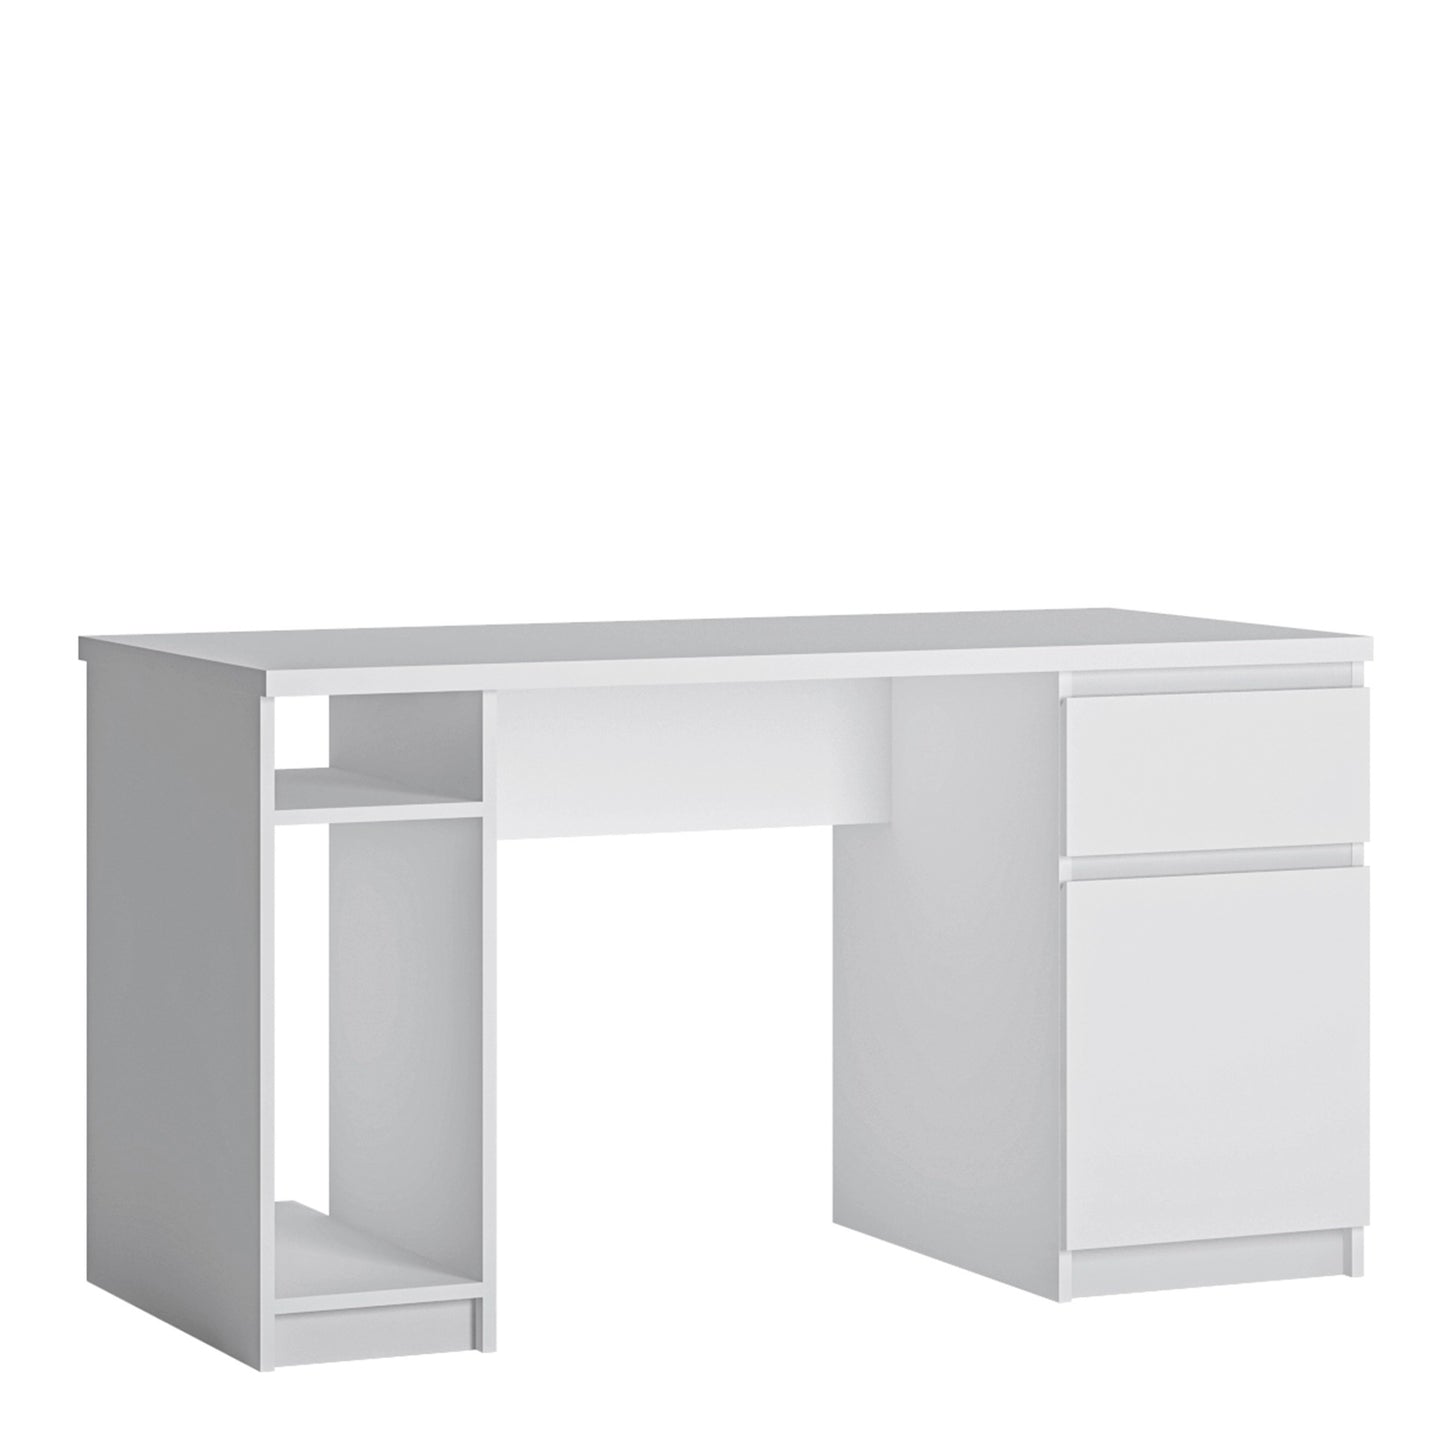 Furniture To Go Fribo 1 Door 1 Drawer Twin Pedestal Desk in White